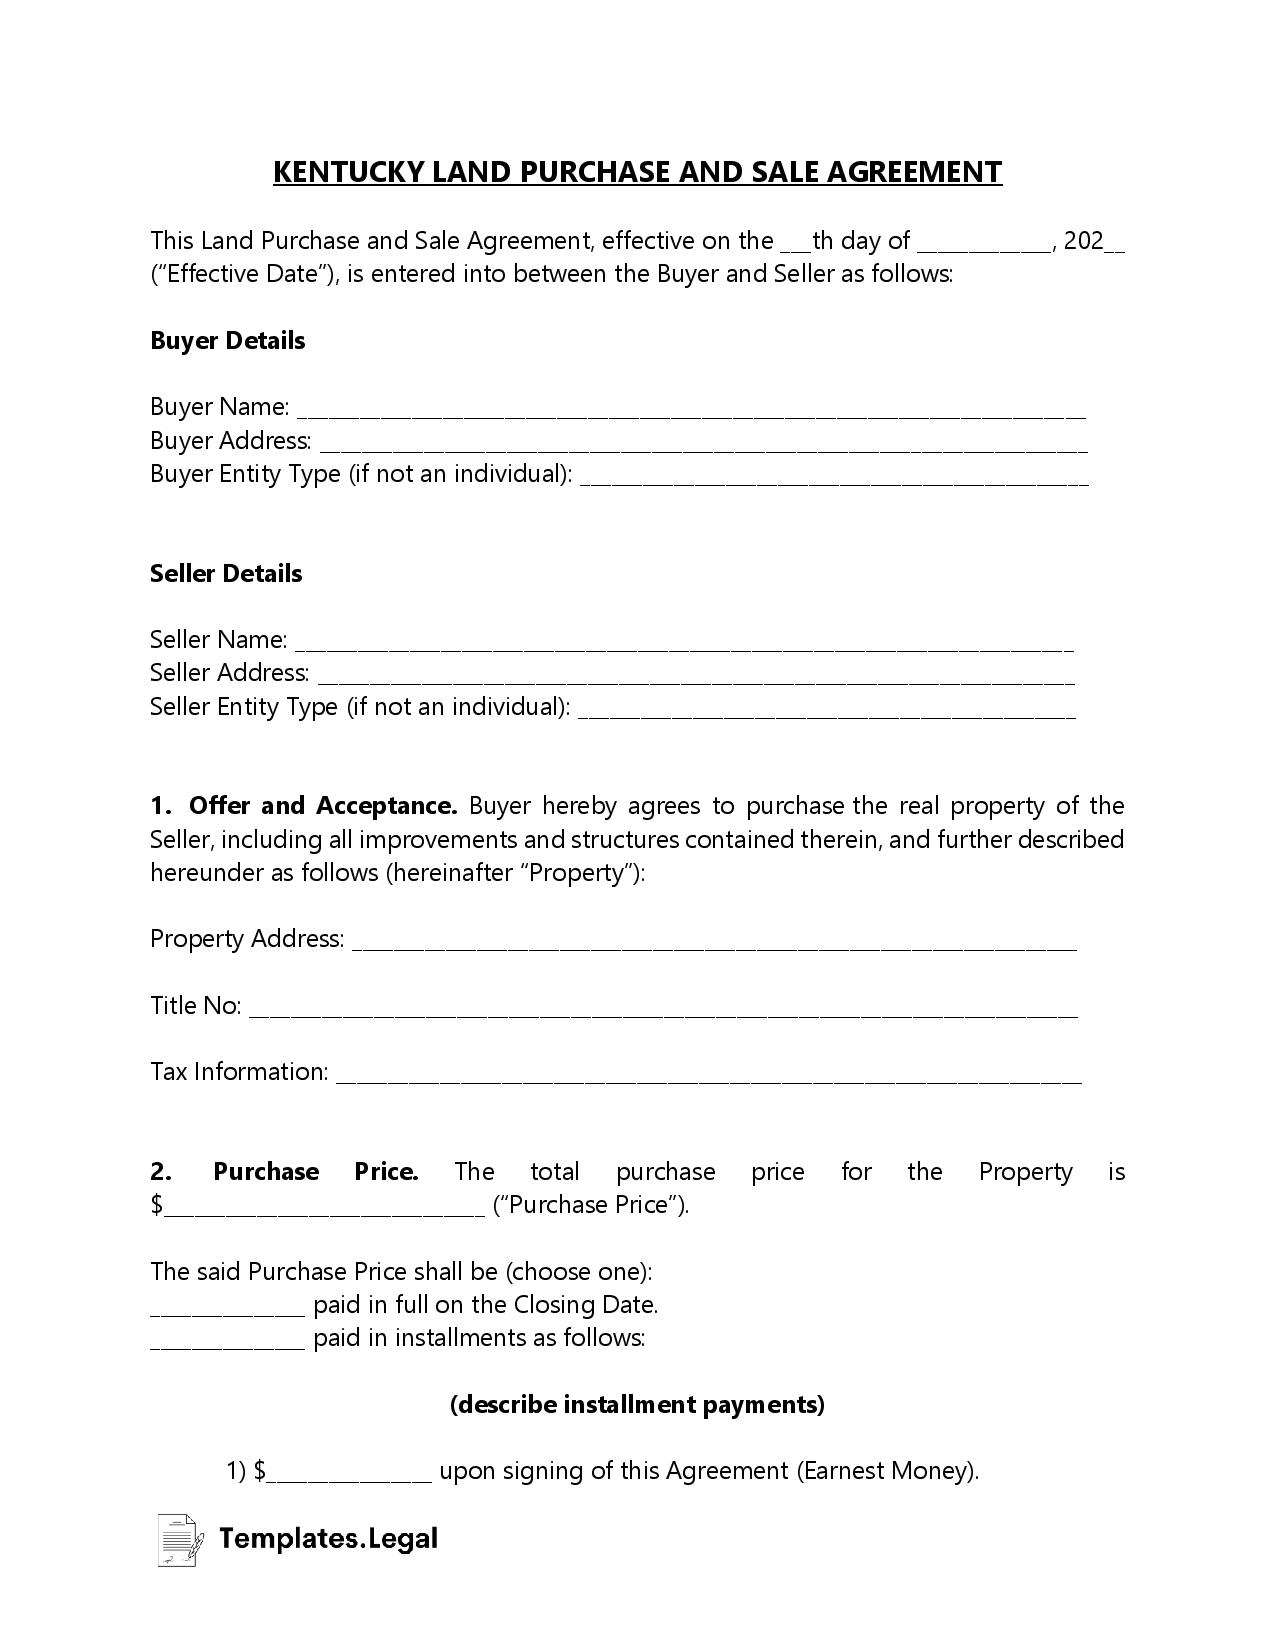 Kentucky Land Purchase and Sale Agreement - Templates.Legal